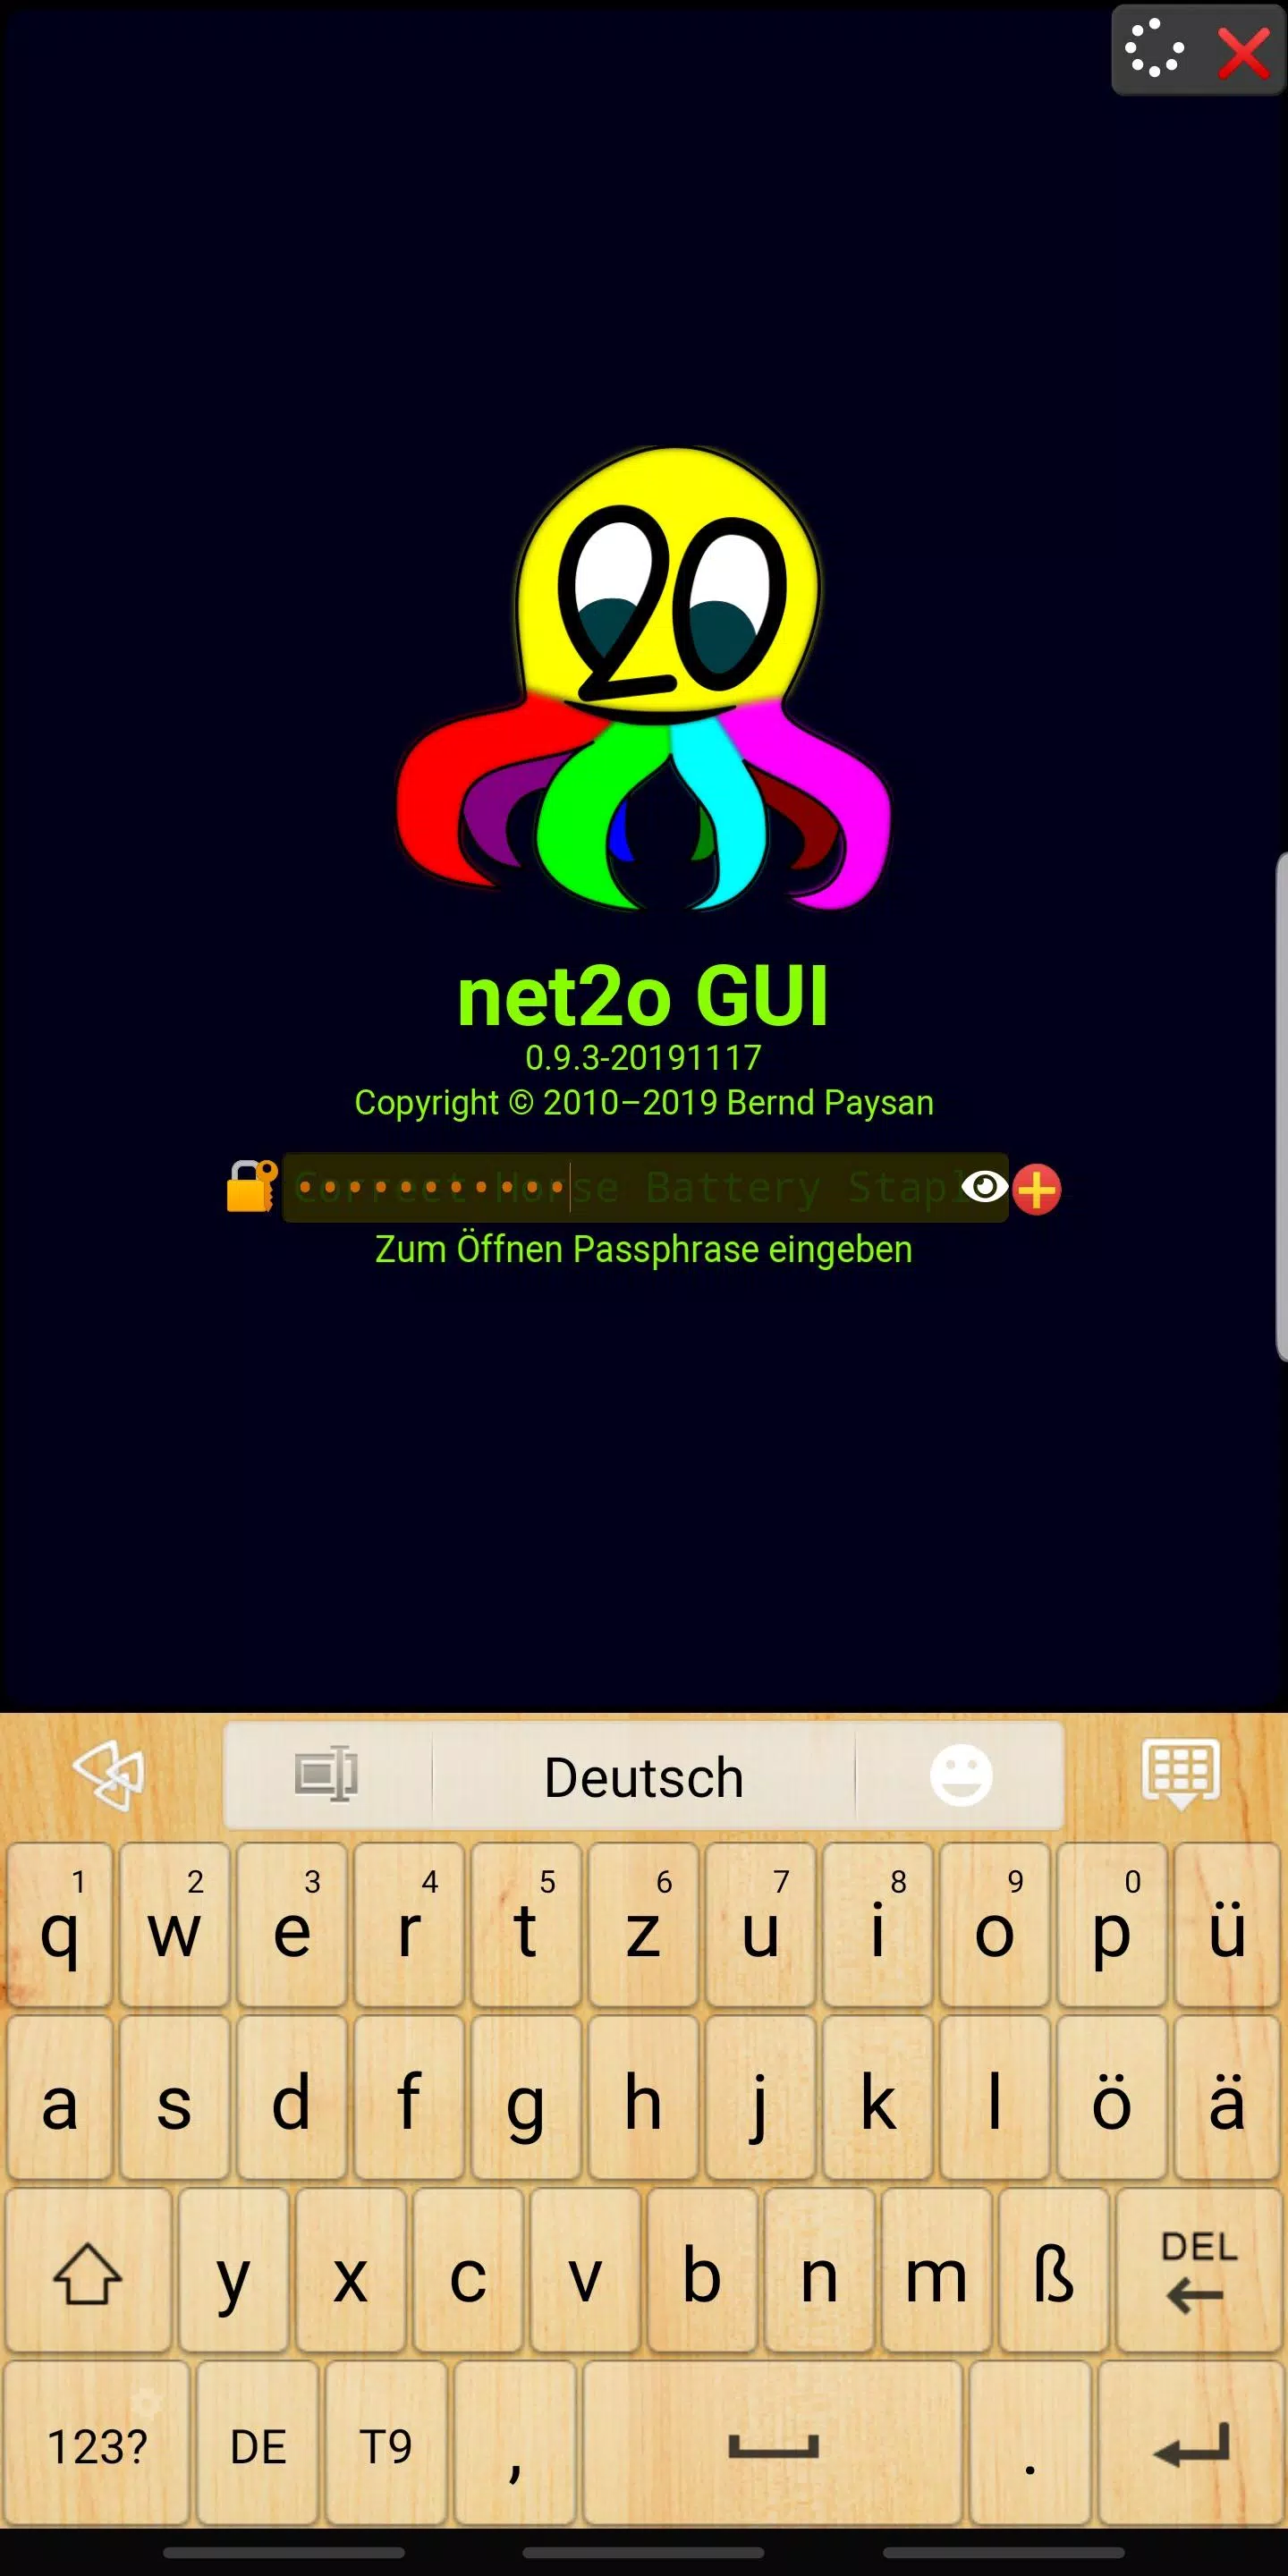 gforth - GNU Forth for Android Apk Download for Android- Latest version  0.7.9_20230726- gnu.gforth